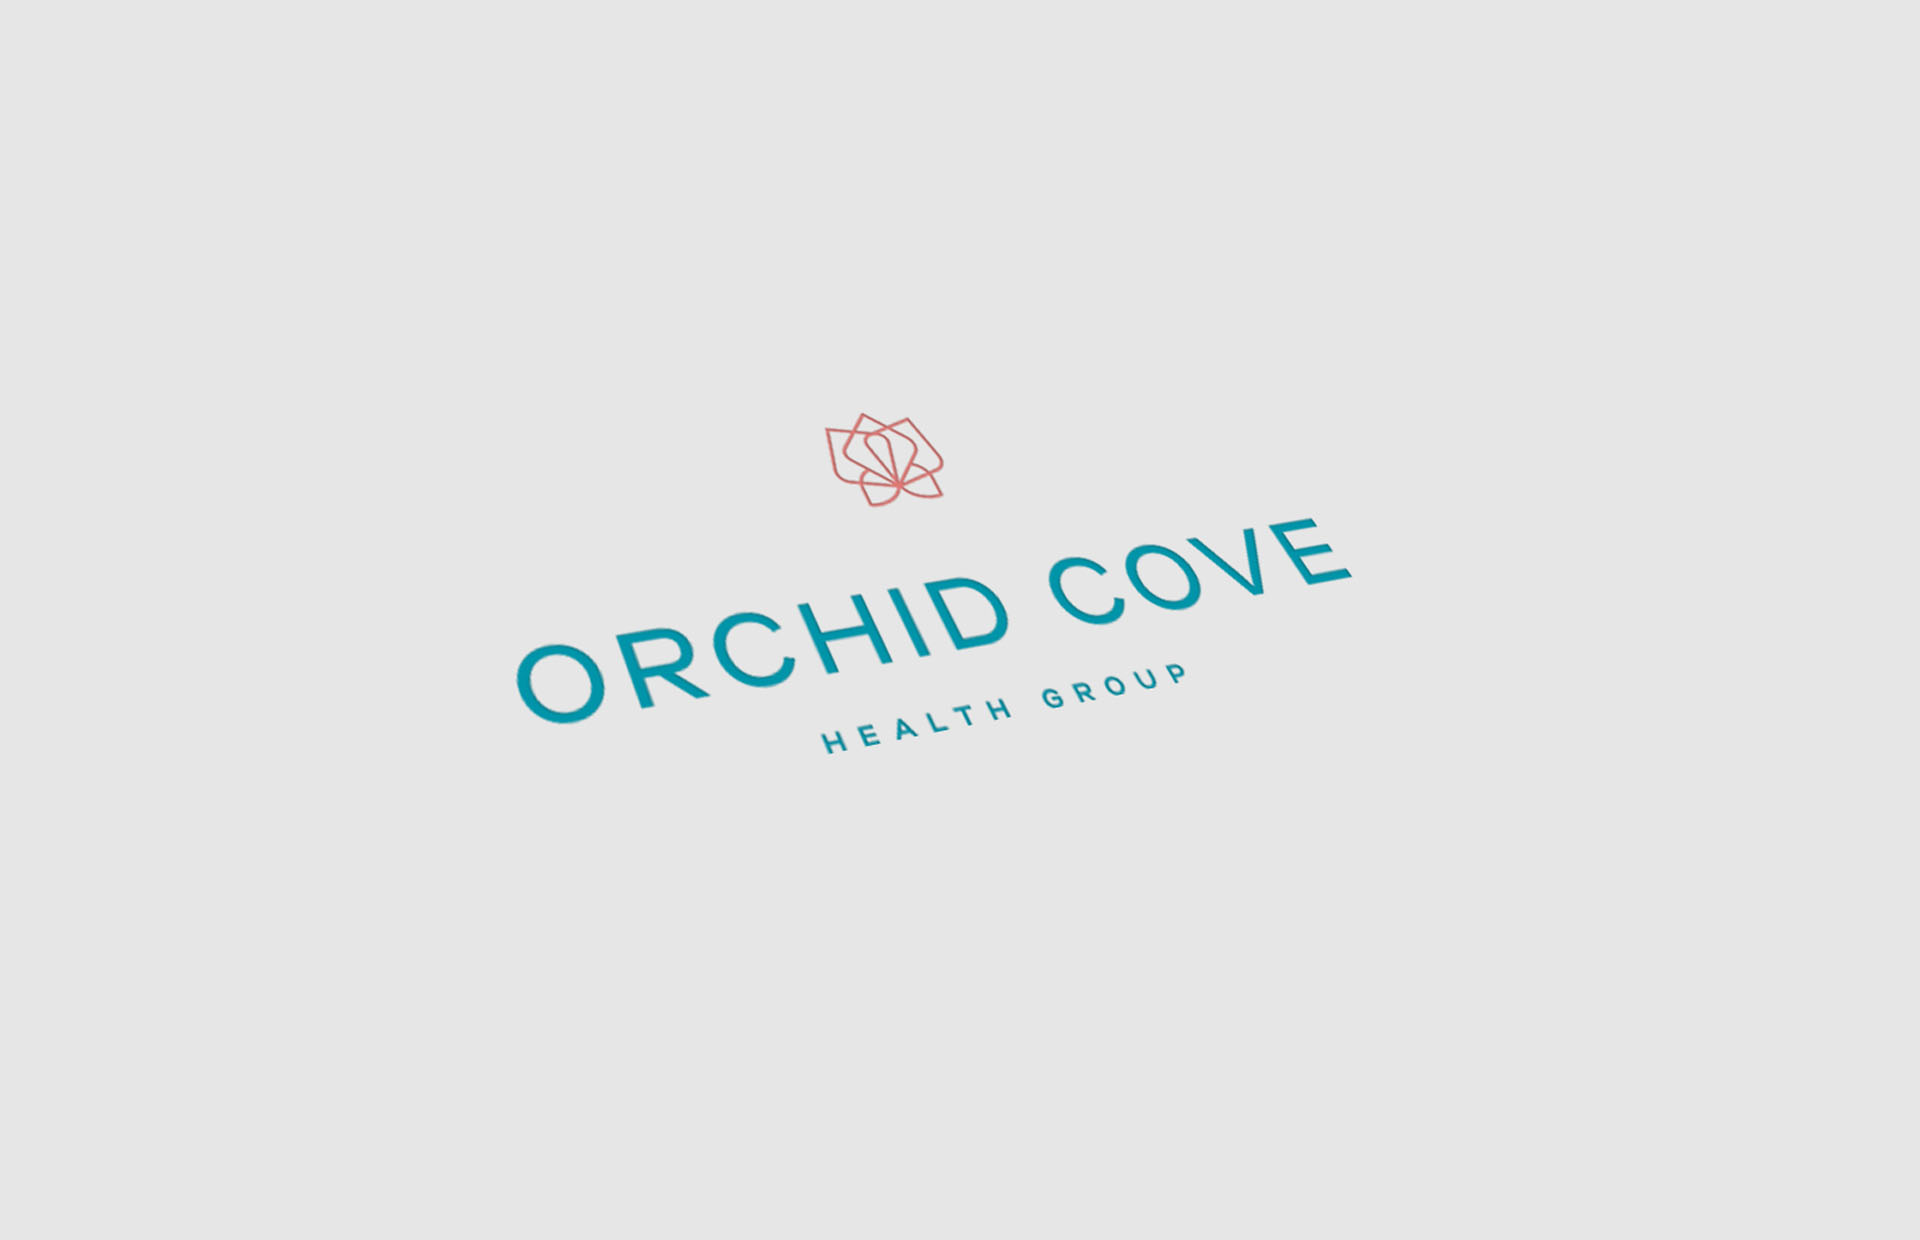 Orchid Cove_5